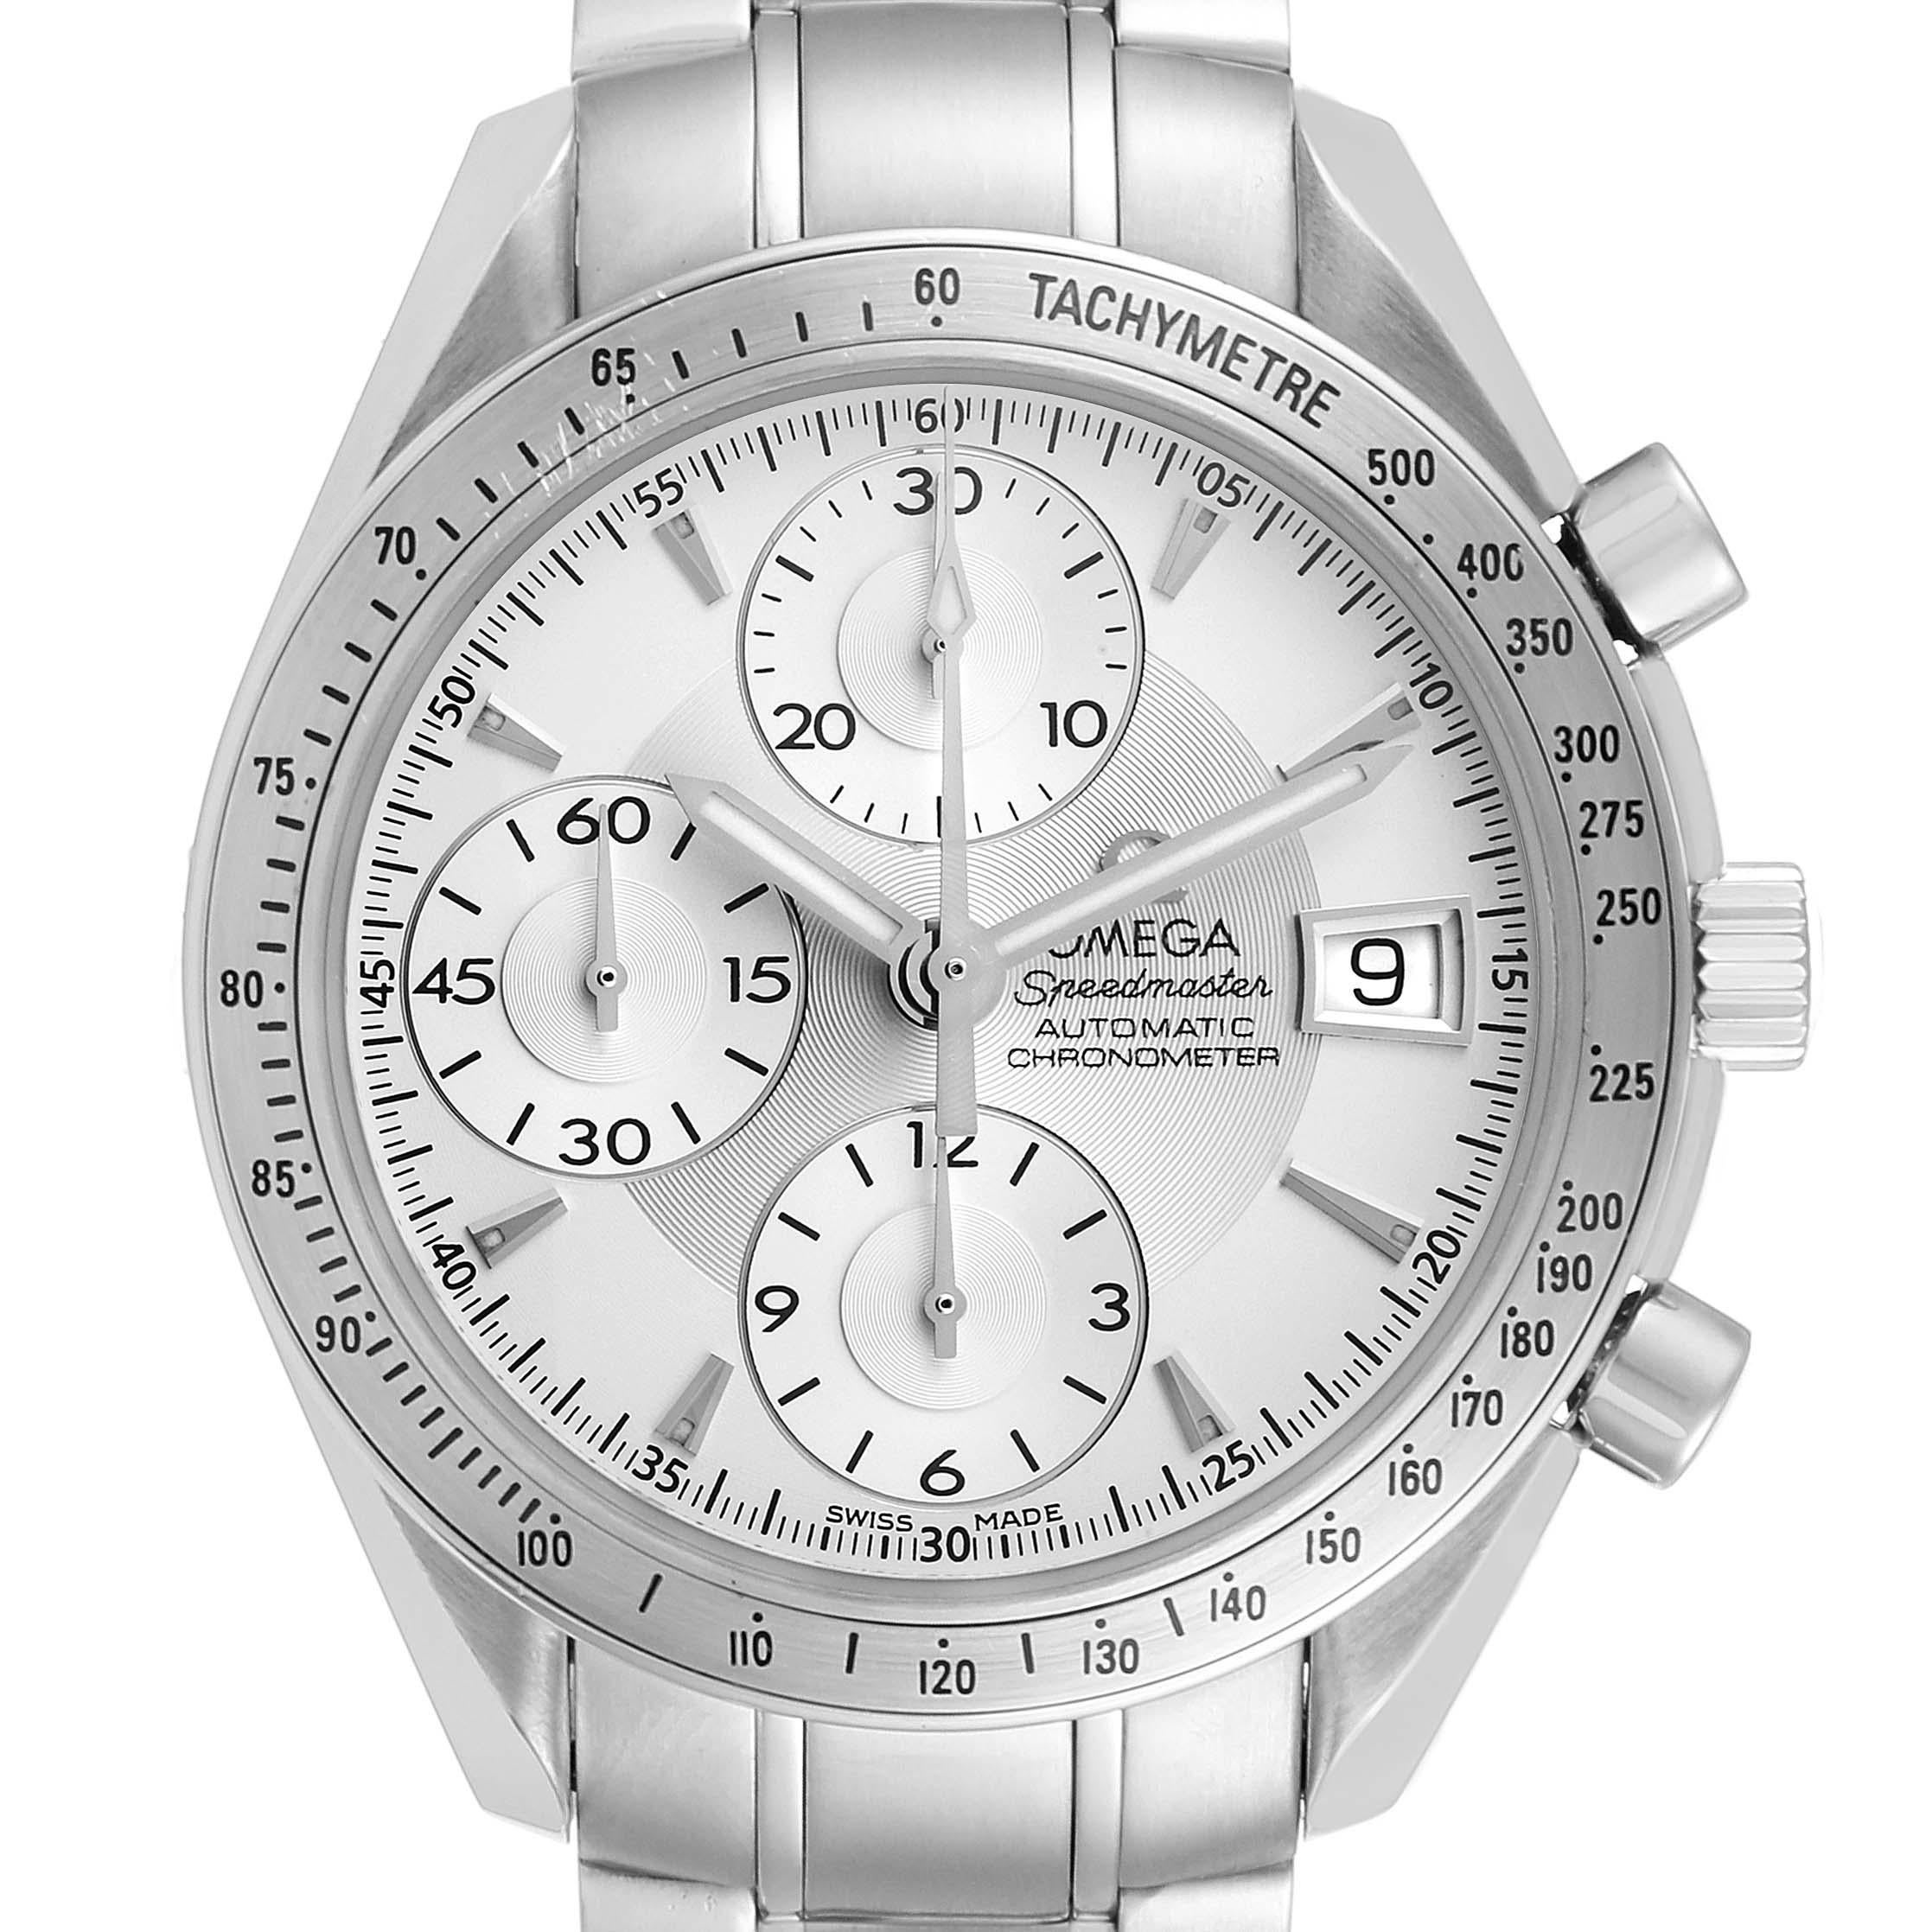 Omega Speedmaster Silver Dial Chronograph Mens Watch 3211.30.00 Card. Automatic self-winding chronograph movement. Caliber 1164. Stainless steel round case 40 mm in diameter. Stainless steel bezel with tachymetre function. Scratch-resistant sapphire